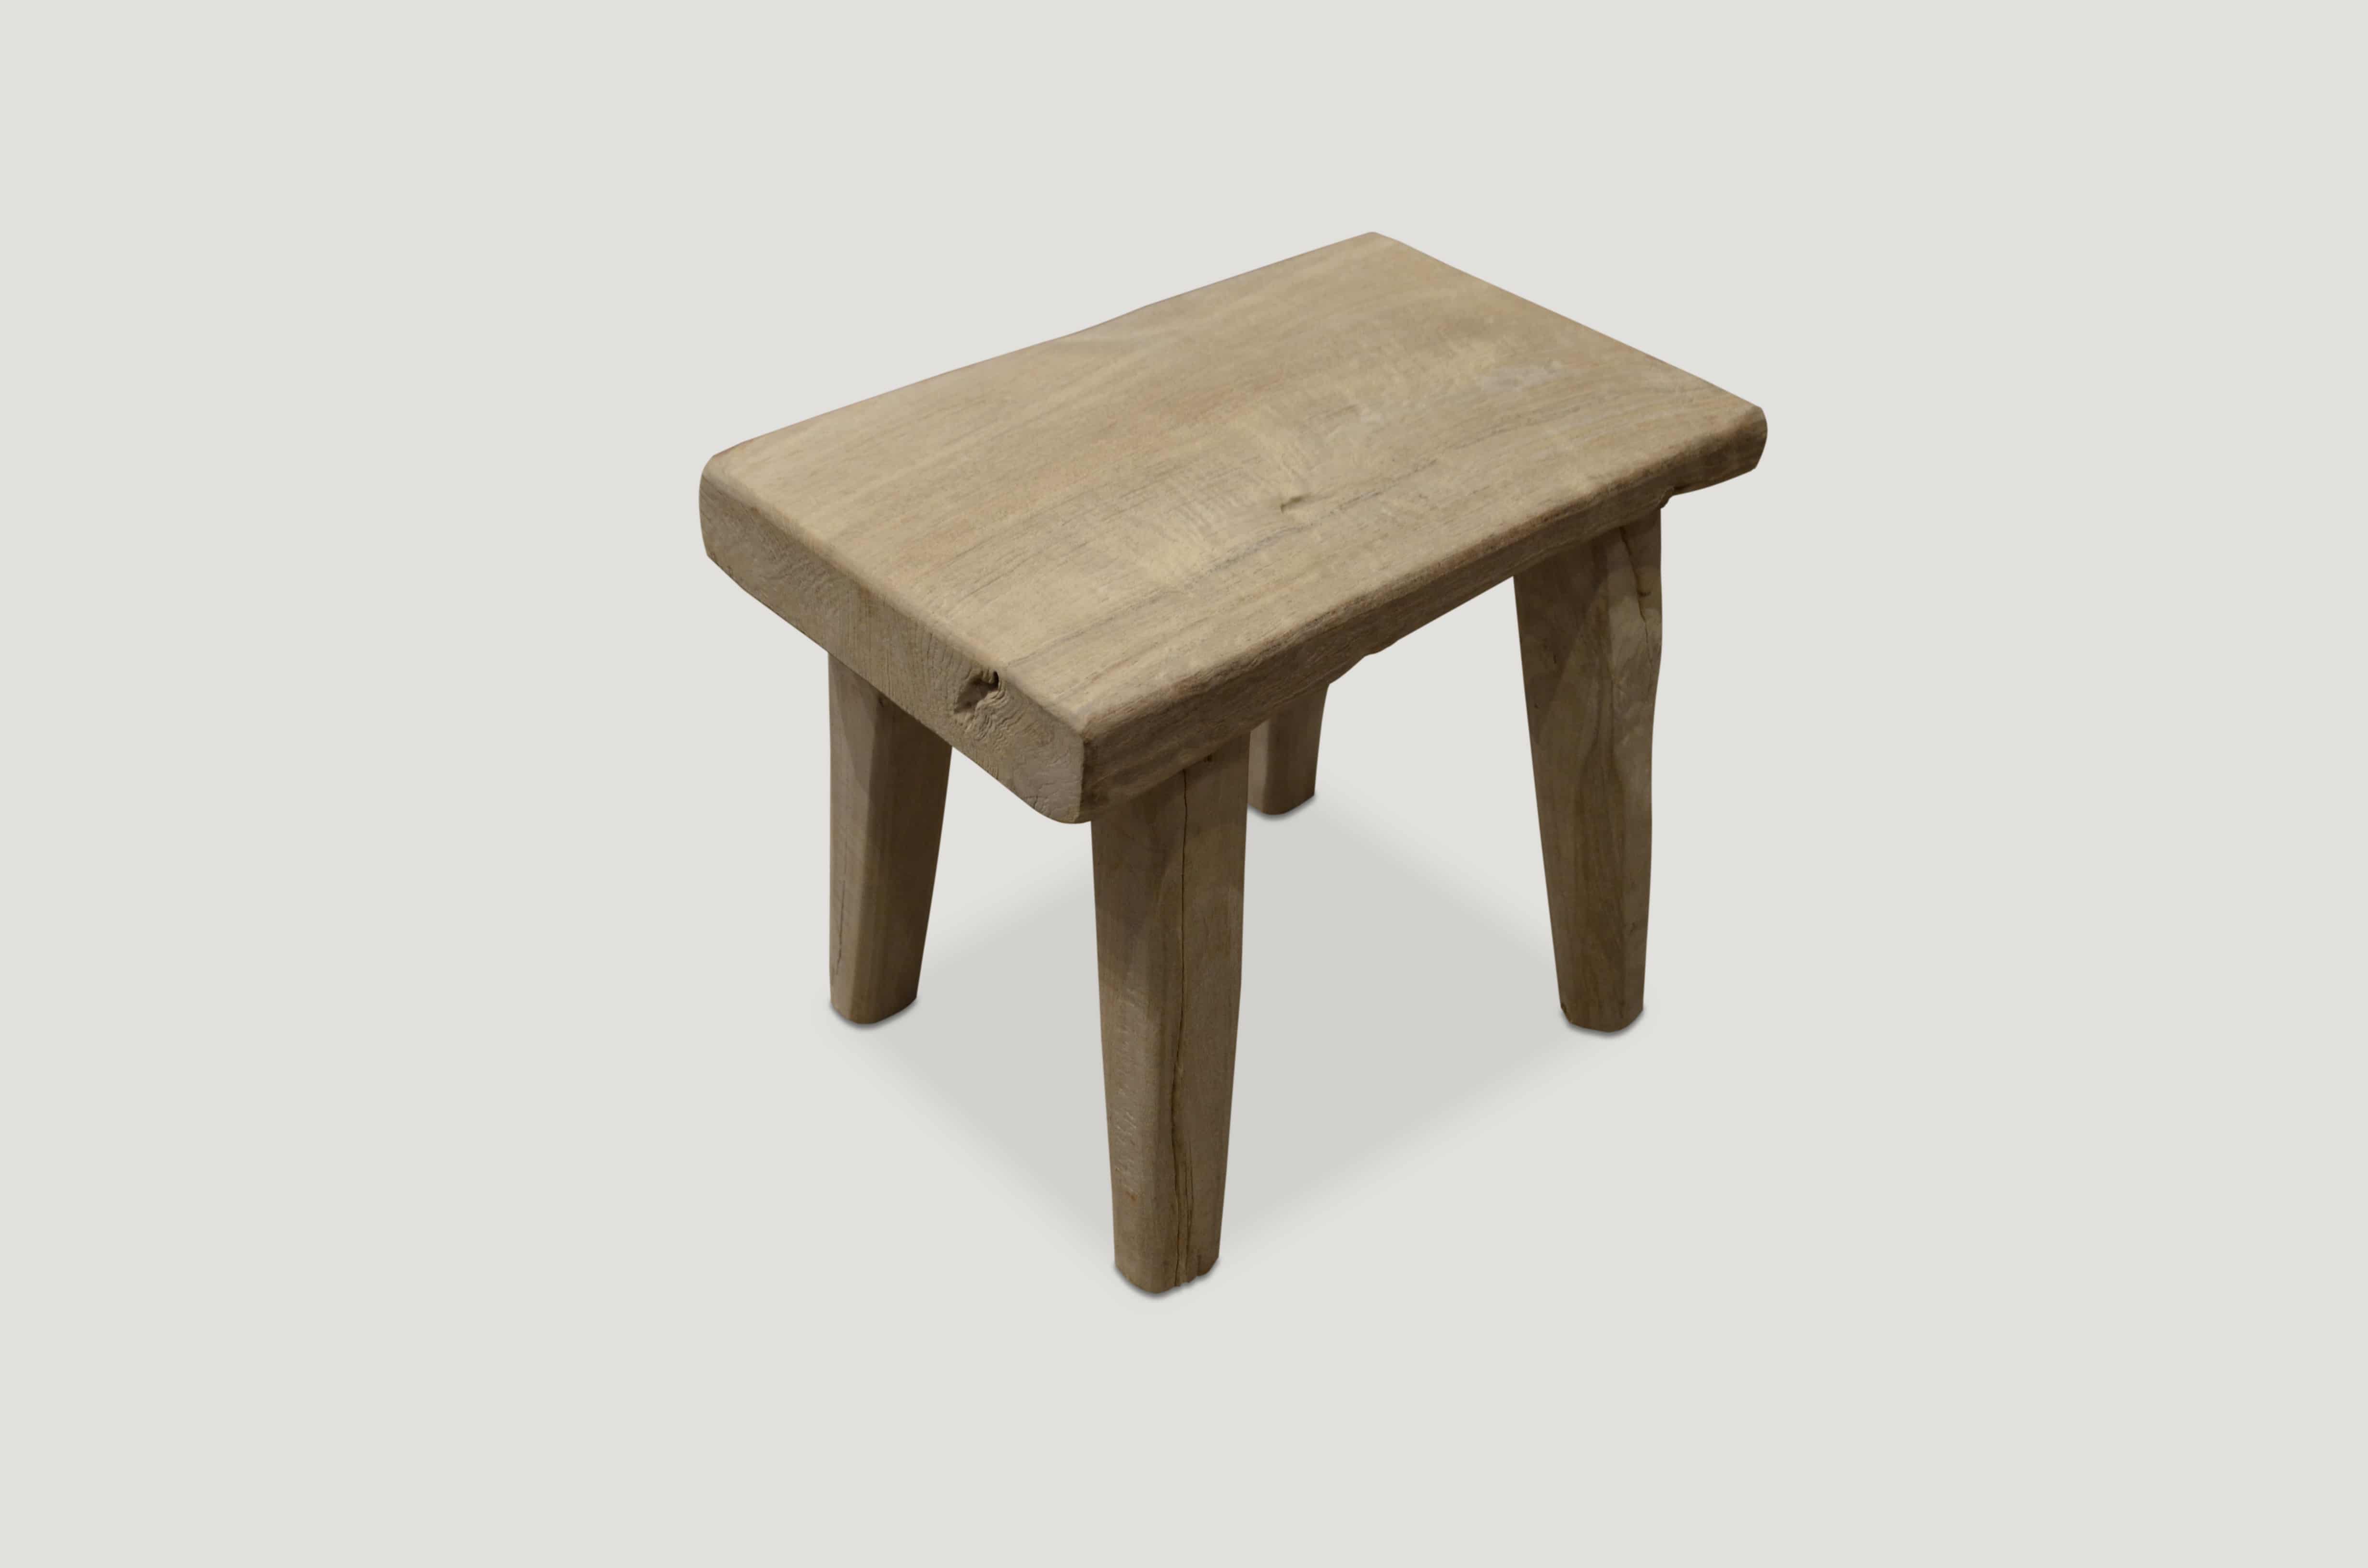 ST. BARTS SIDE TABLE OR STOOL